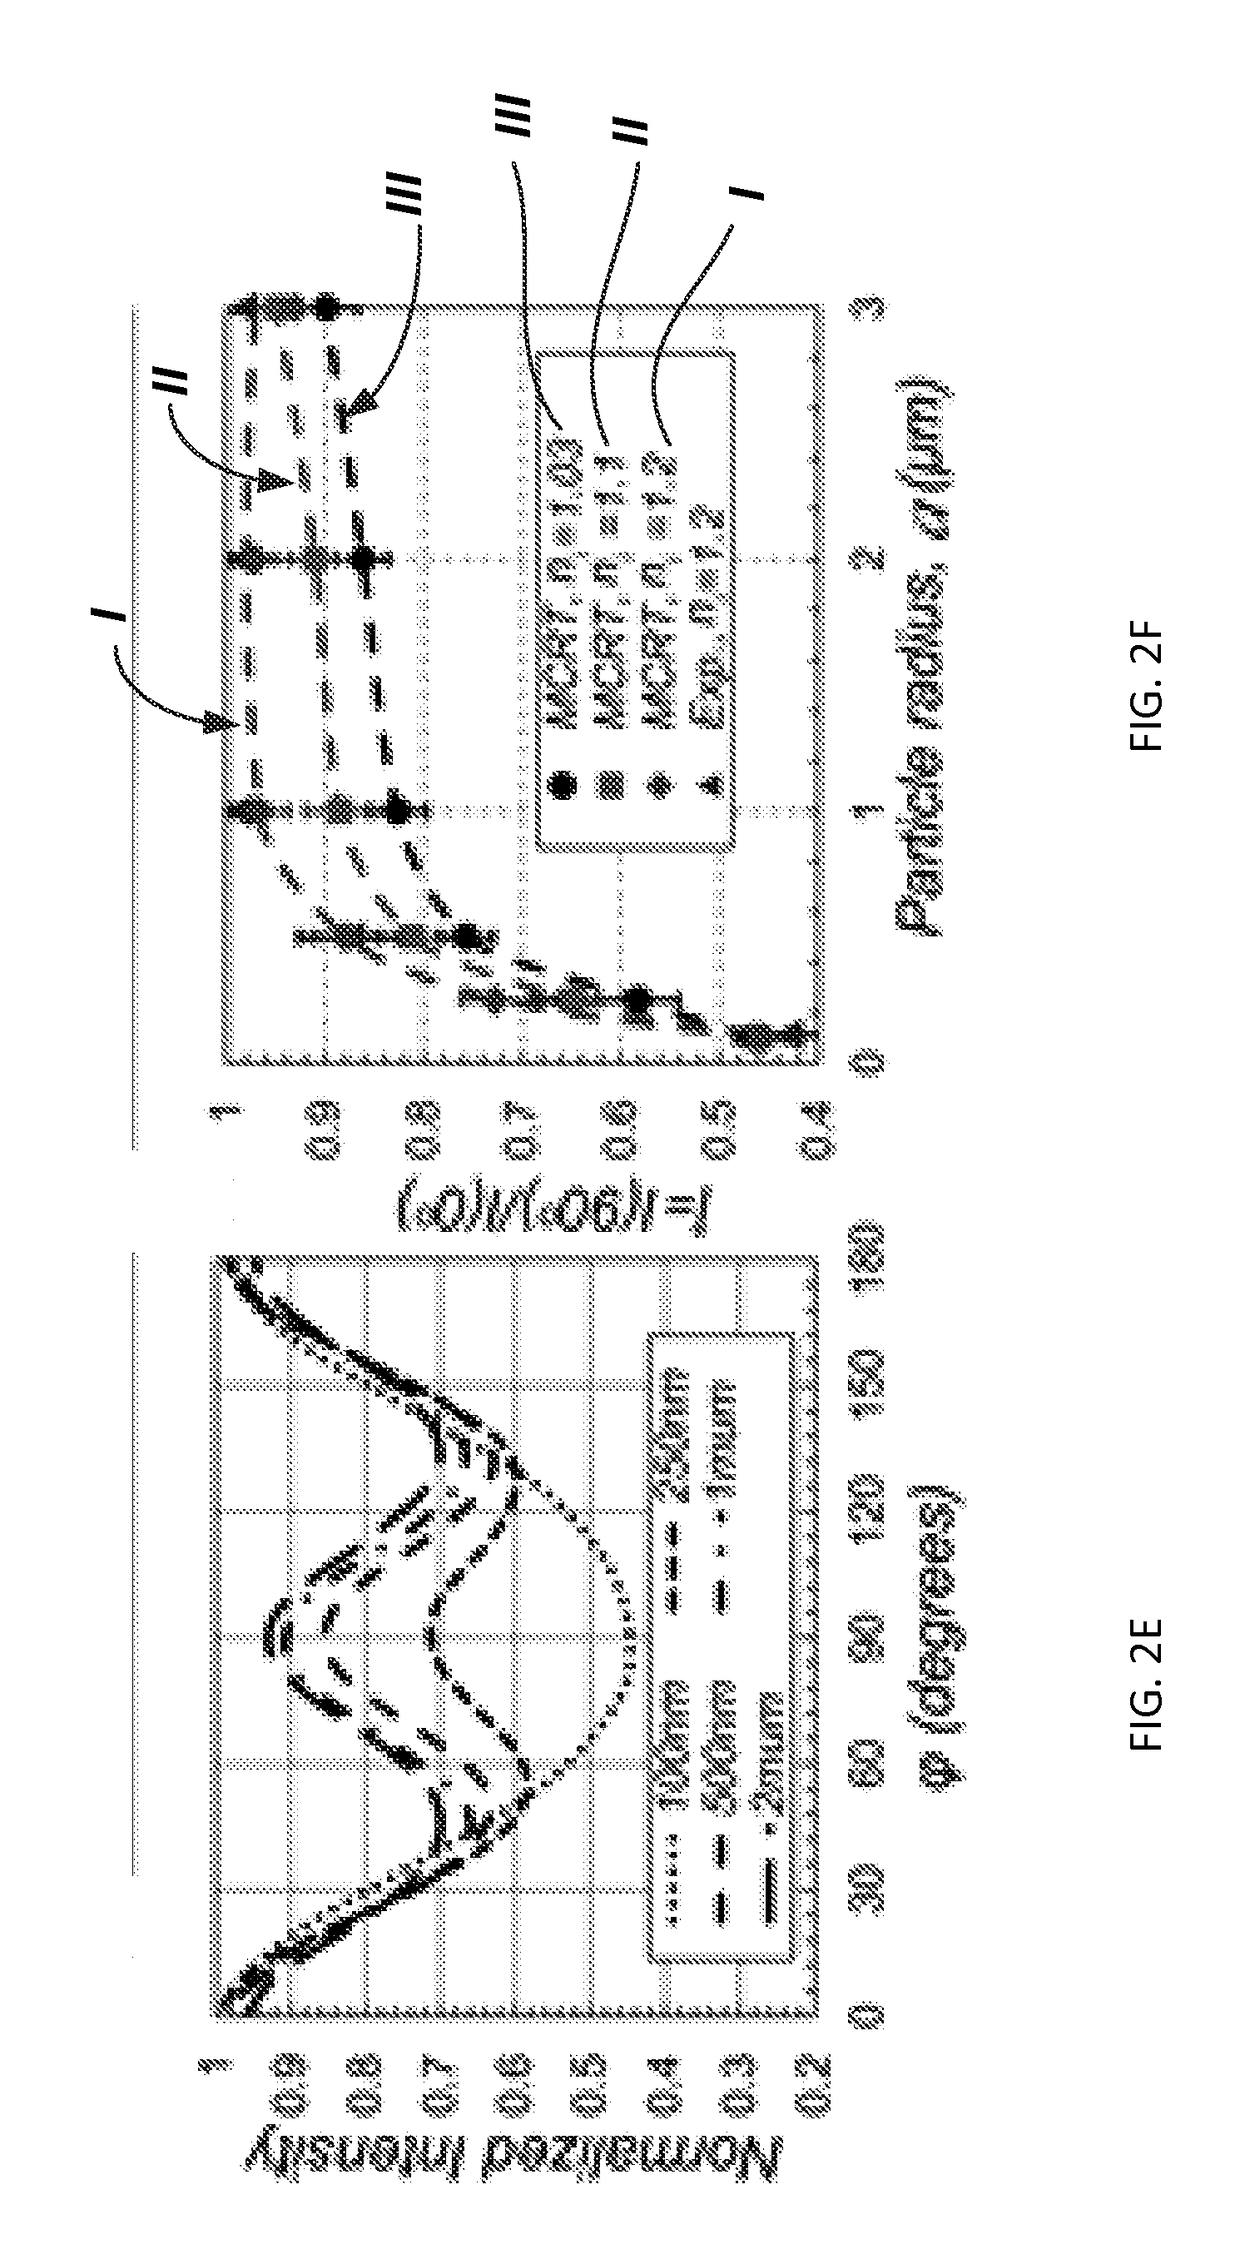 System and methods estimation of mechanical properties and size of light-scattering particles in materials